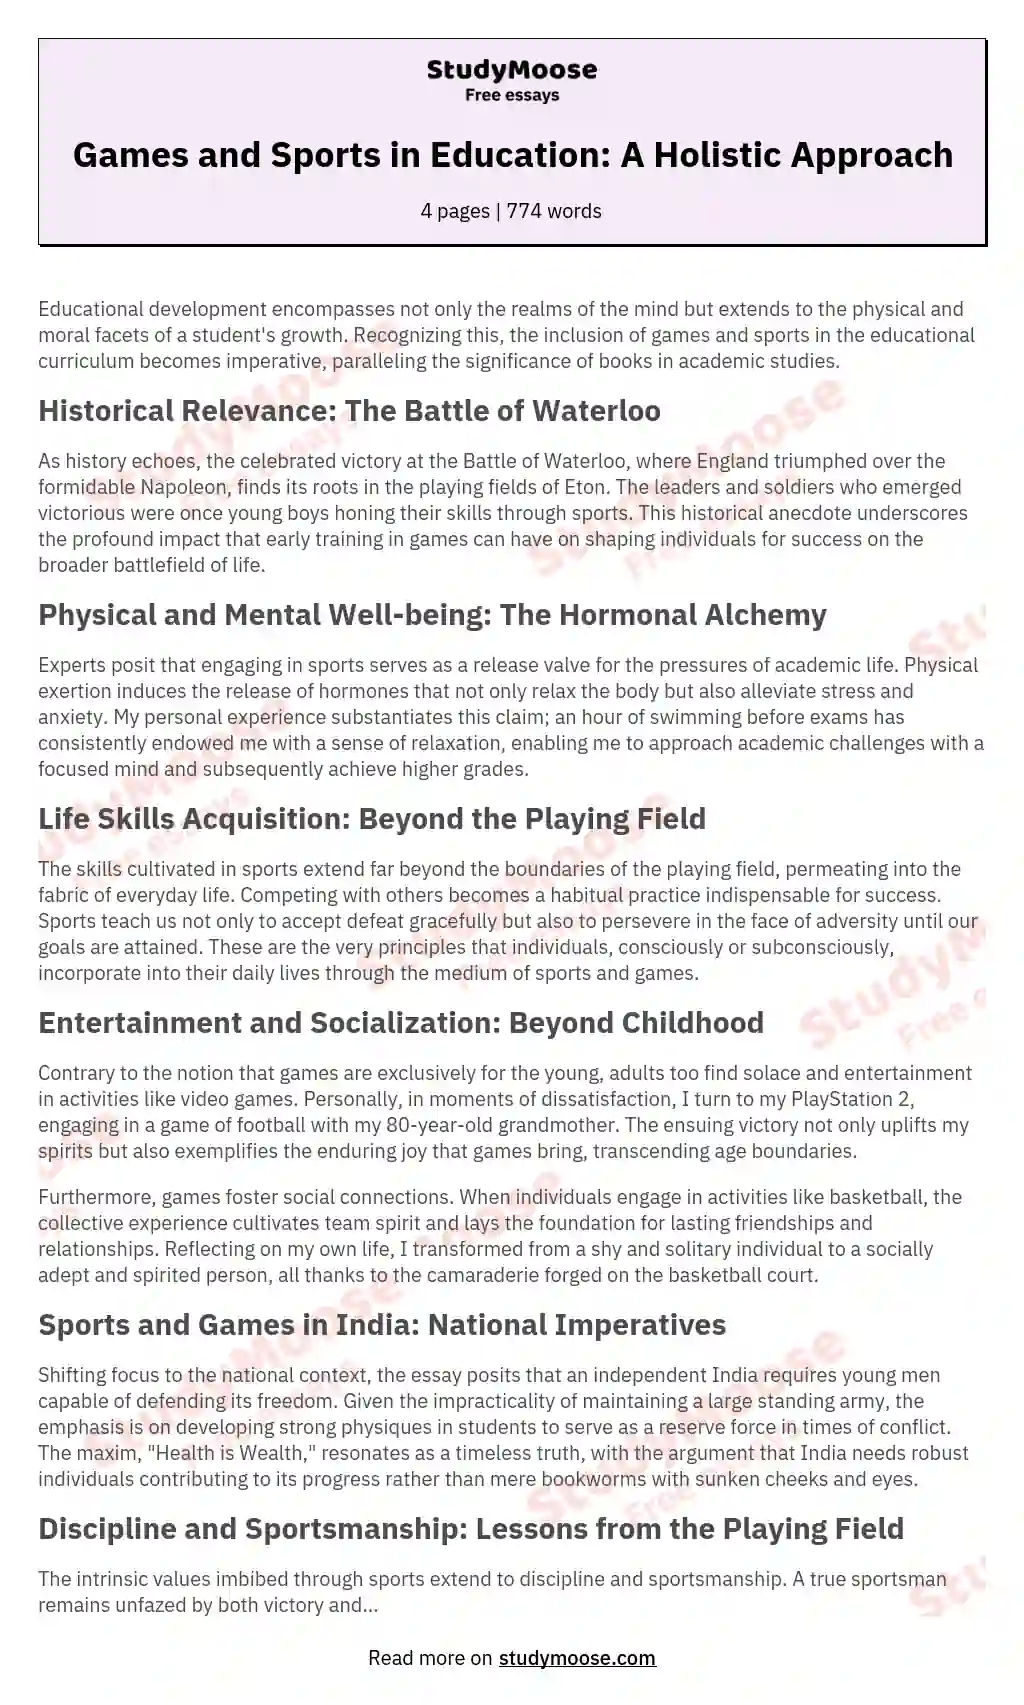 Games and Sports in Education: A Holistic Approach essay